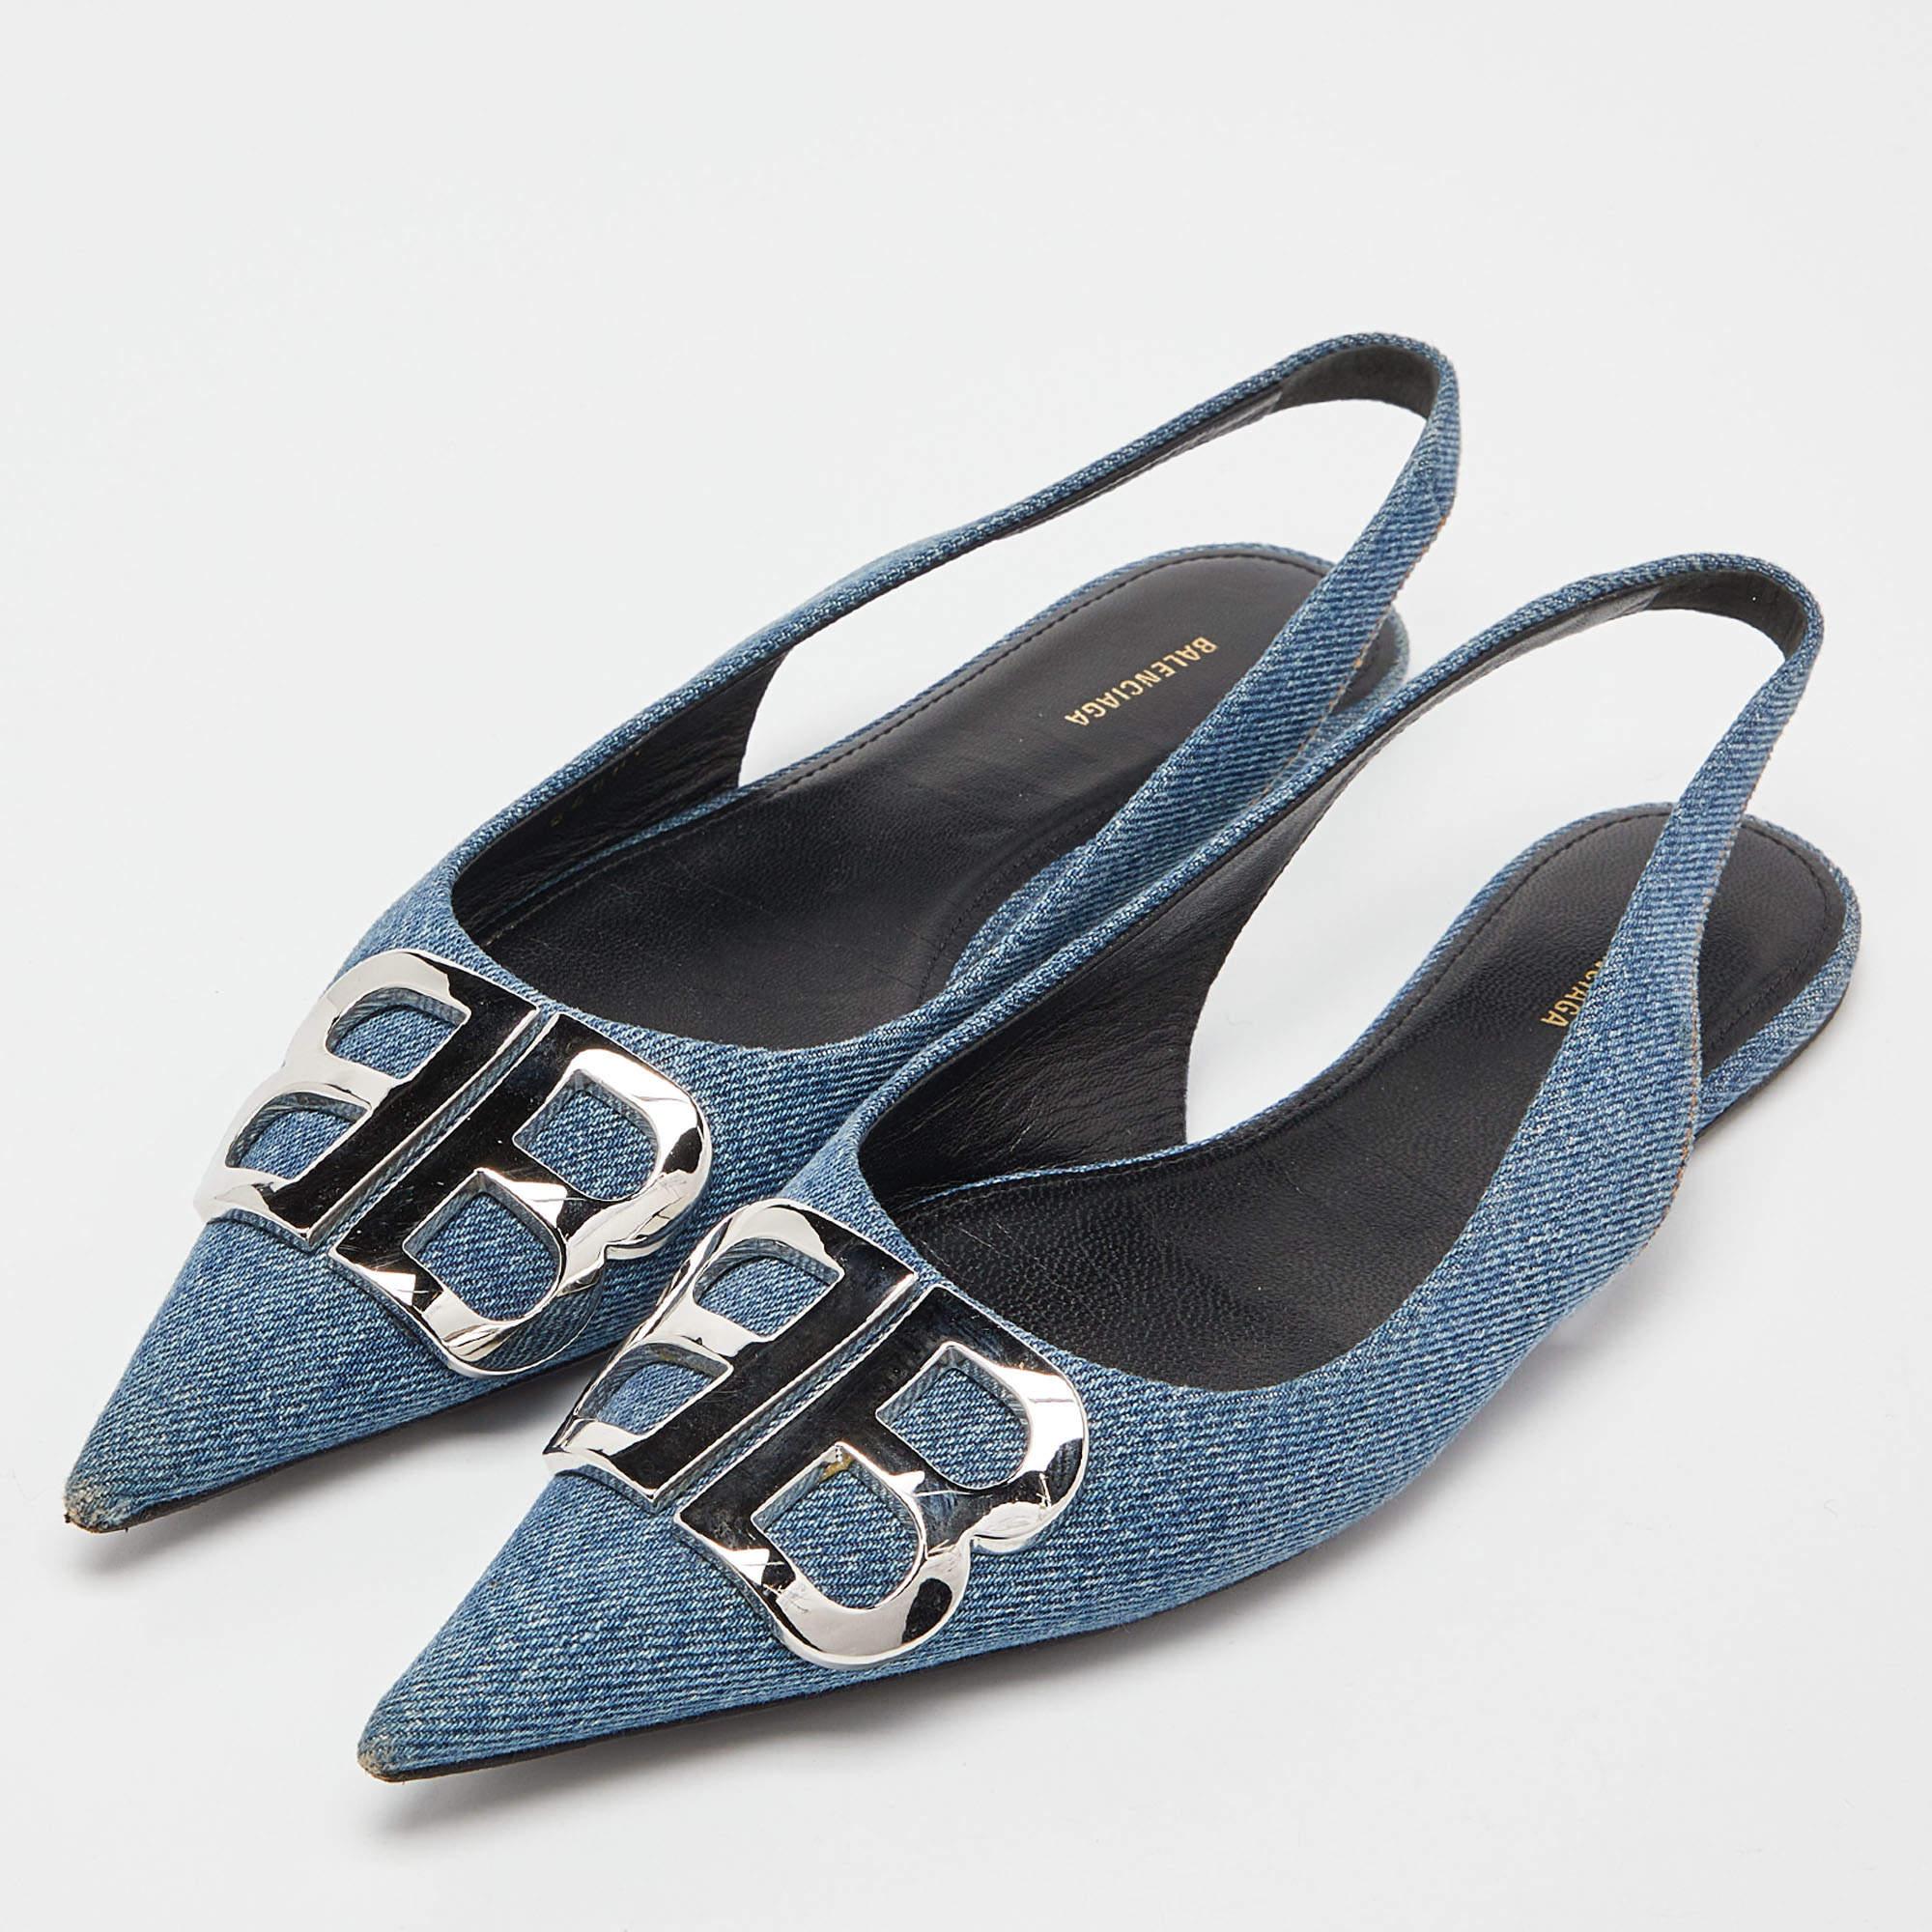 If you are an admirer of the latest fashion trends, this pair of Balenciaga Knife sandals will add just the right vibe to your closet. The pointed-toe sandals are made from denim and adorned with the BB logos and equipped with slingback straps.

